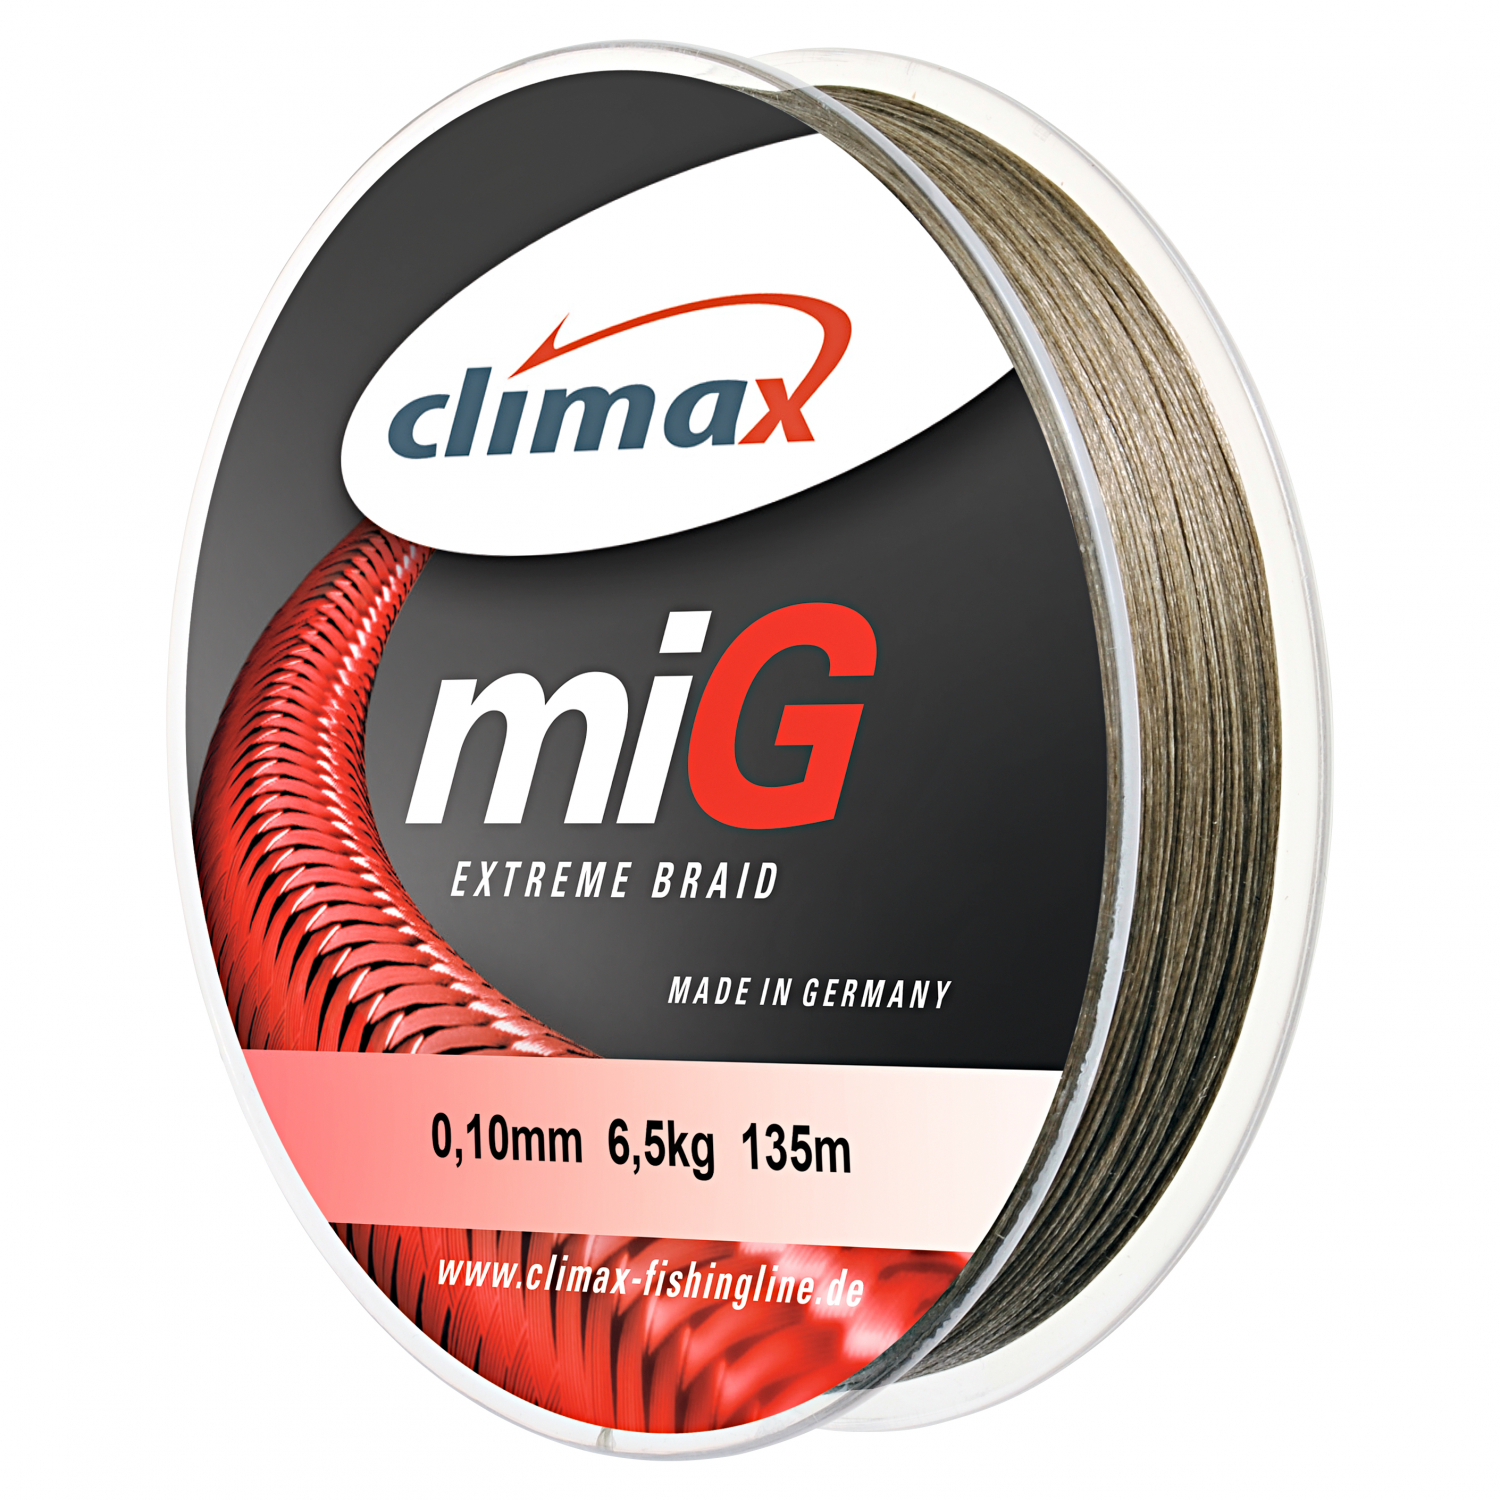 Climax Climax miG Fishing Lines (135m, grey green) 